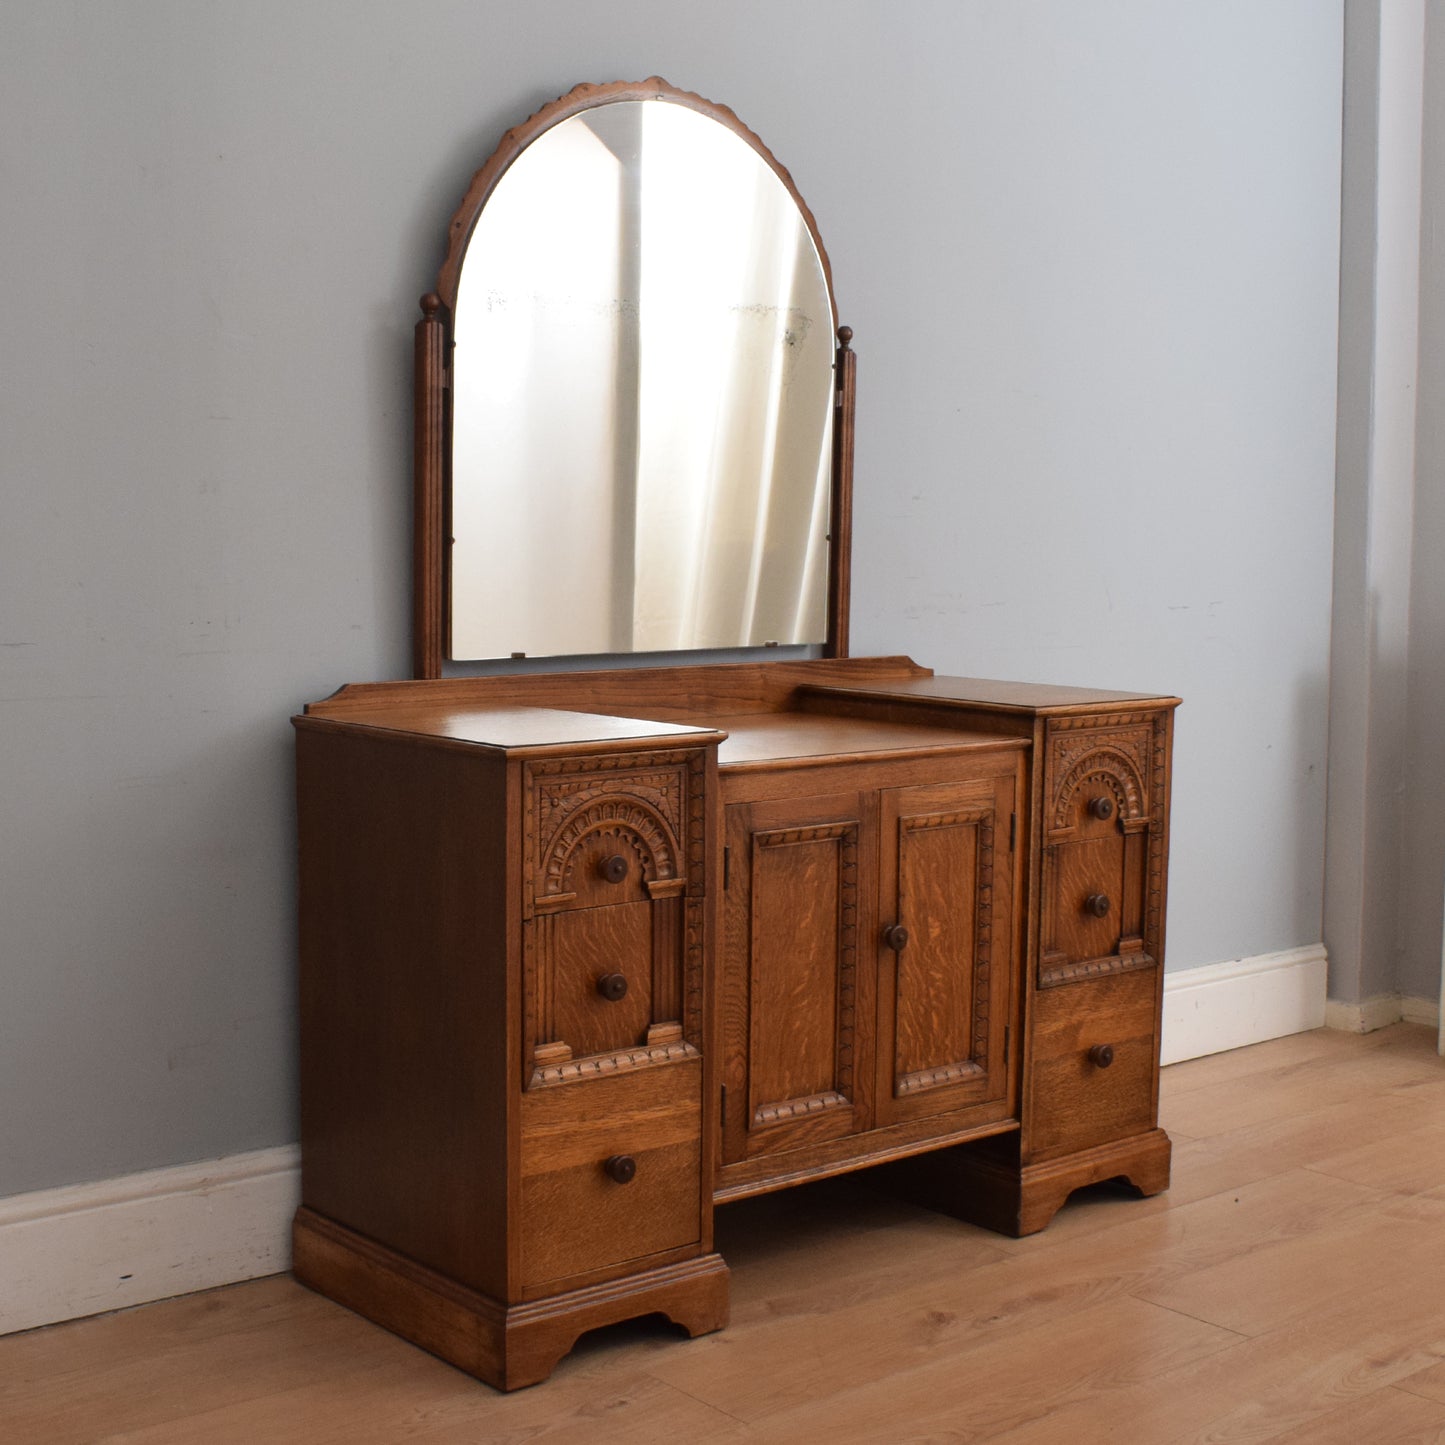 Carved Dressing Table